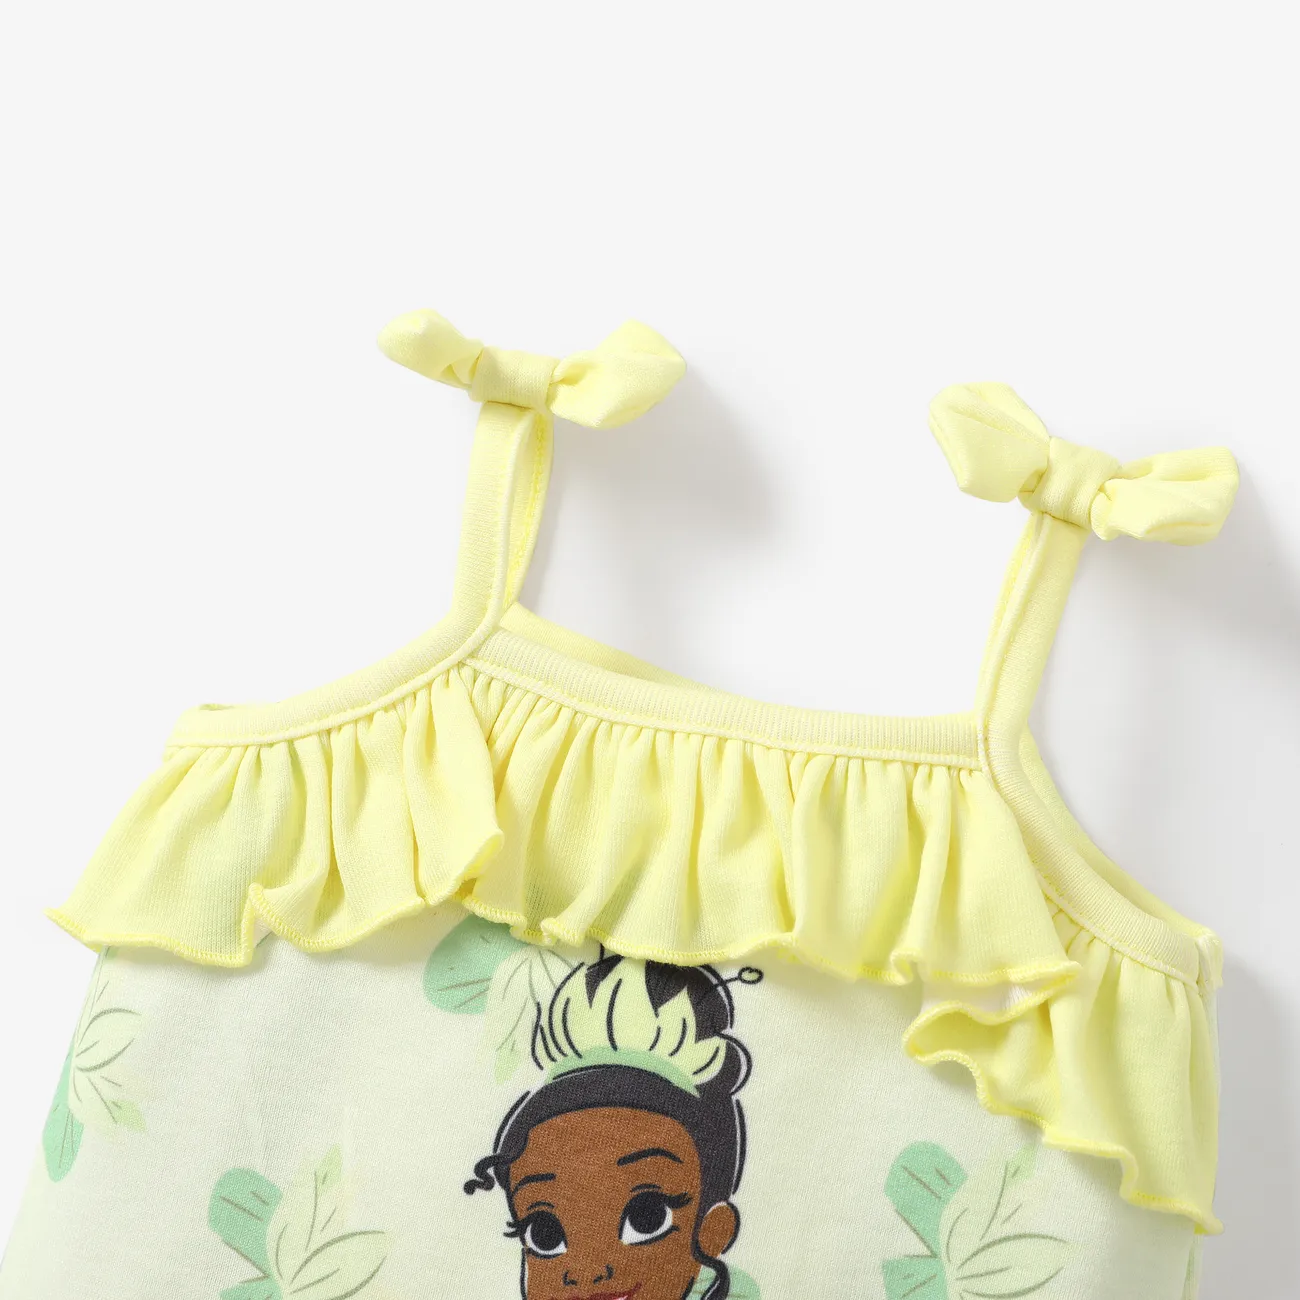 Disney Princess Ariel/Belle 1pc Baby Girls Naia™ Character Bowknot Button Up Romper
 Green big image 1